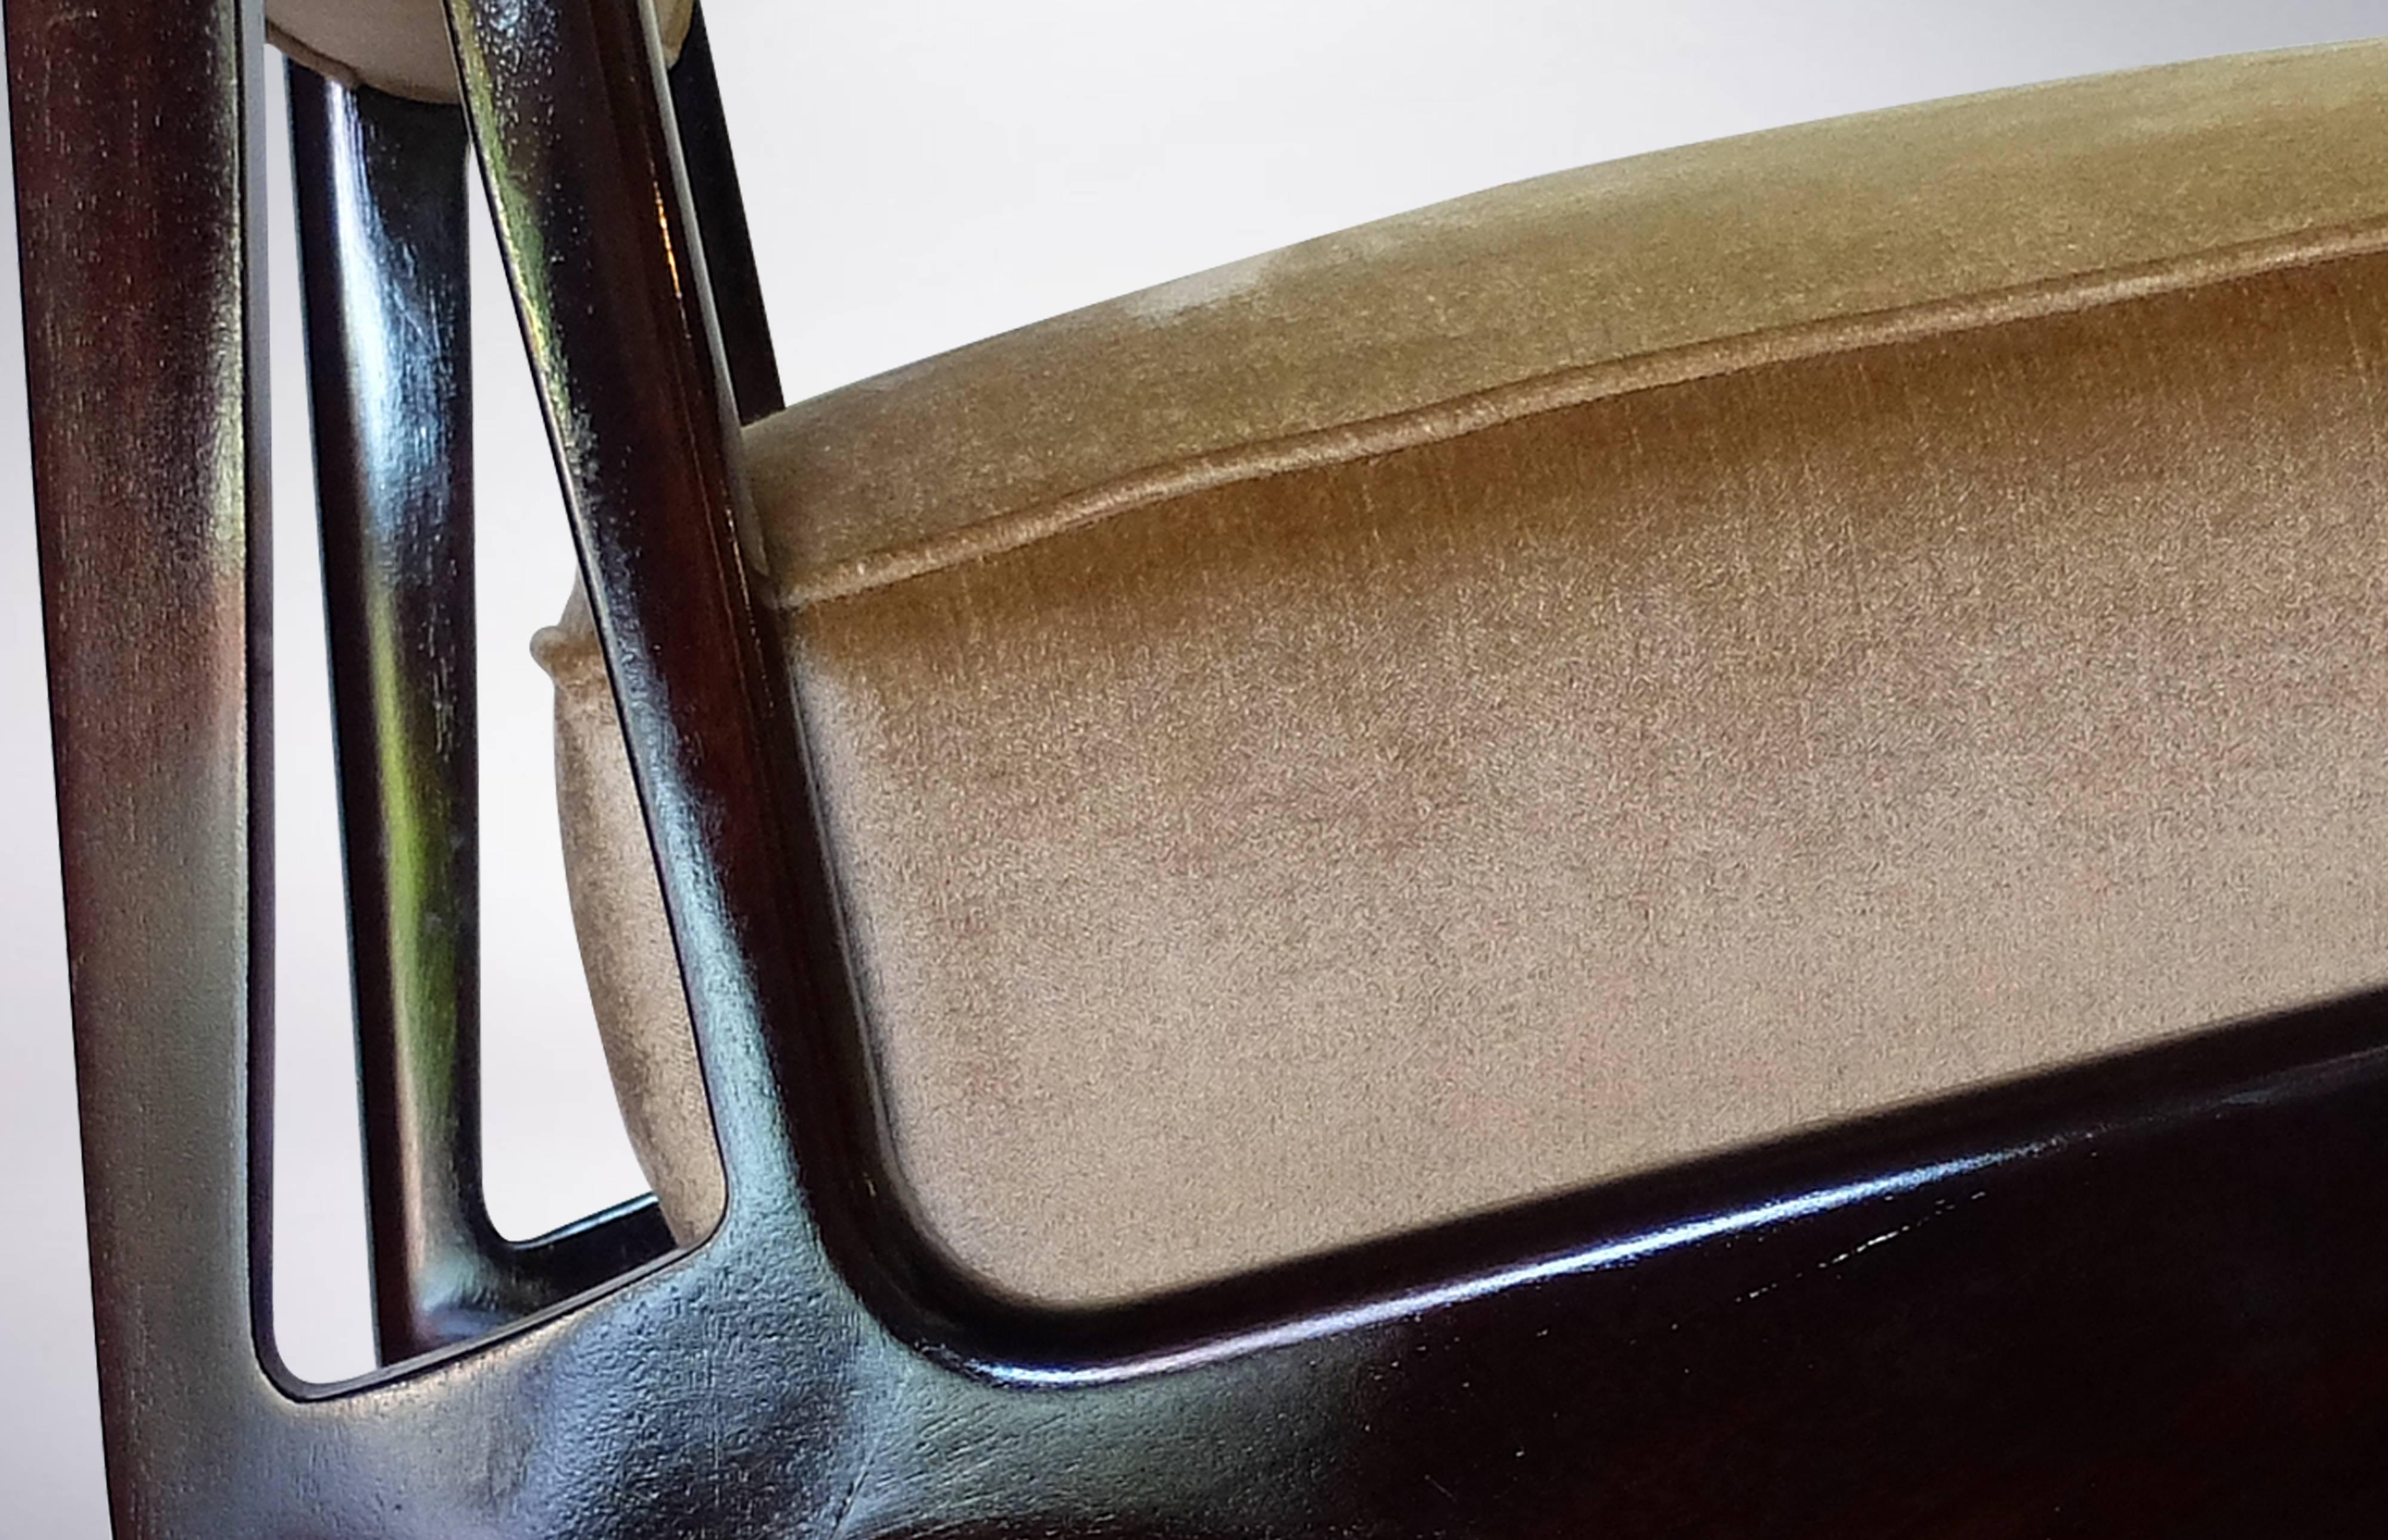 Polished Pair of Modernist Armchairs in Pale Green Velvet Attributed to Ico Parisi, 1950s For Sale